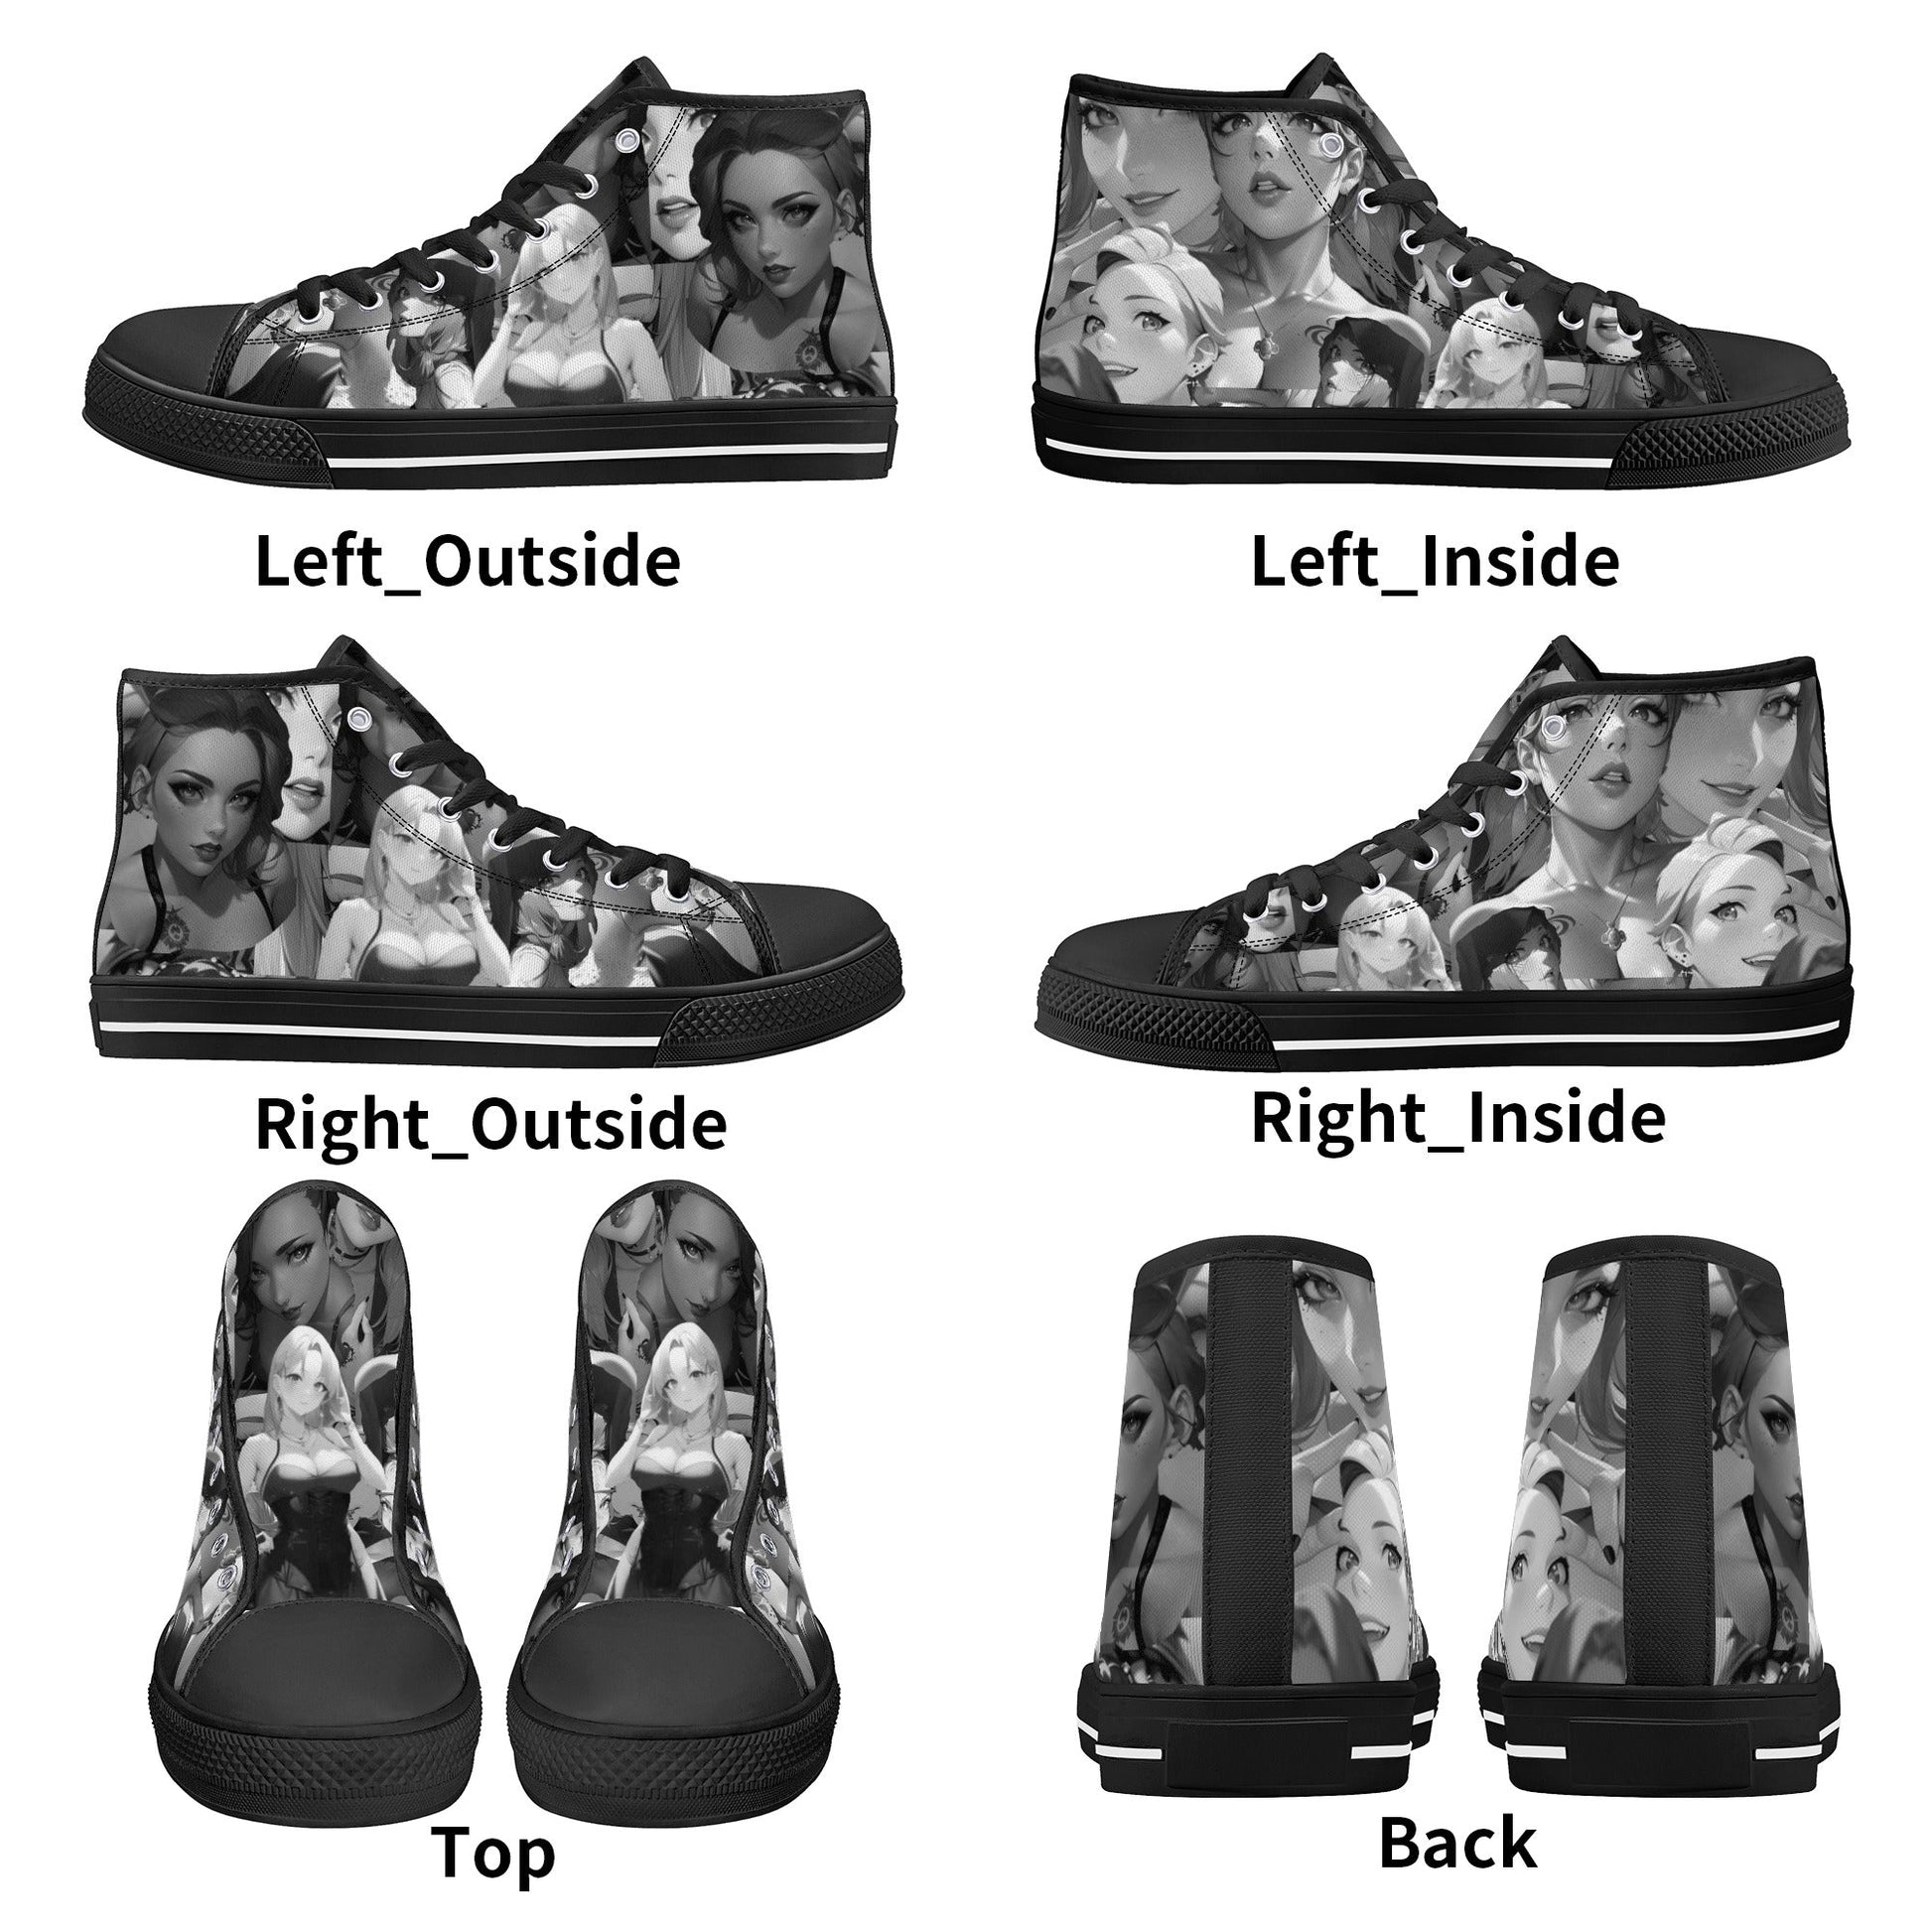 Stand out  with the  Waifu Mens High Top Canvas Shoes  available at Hey Nugget. Grab yours today!